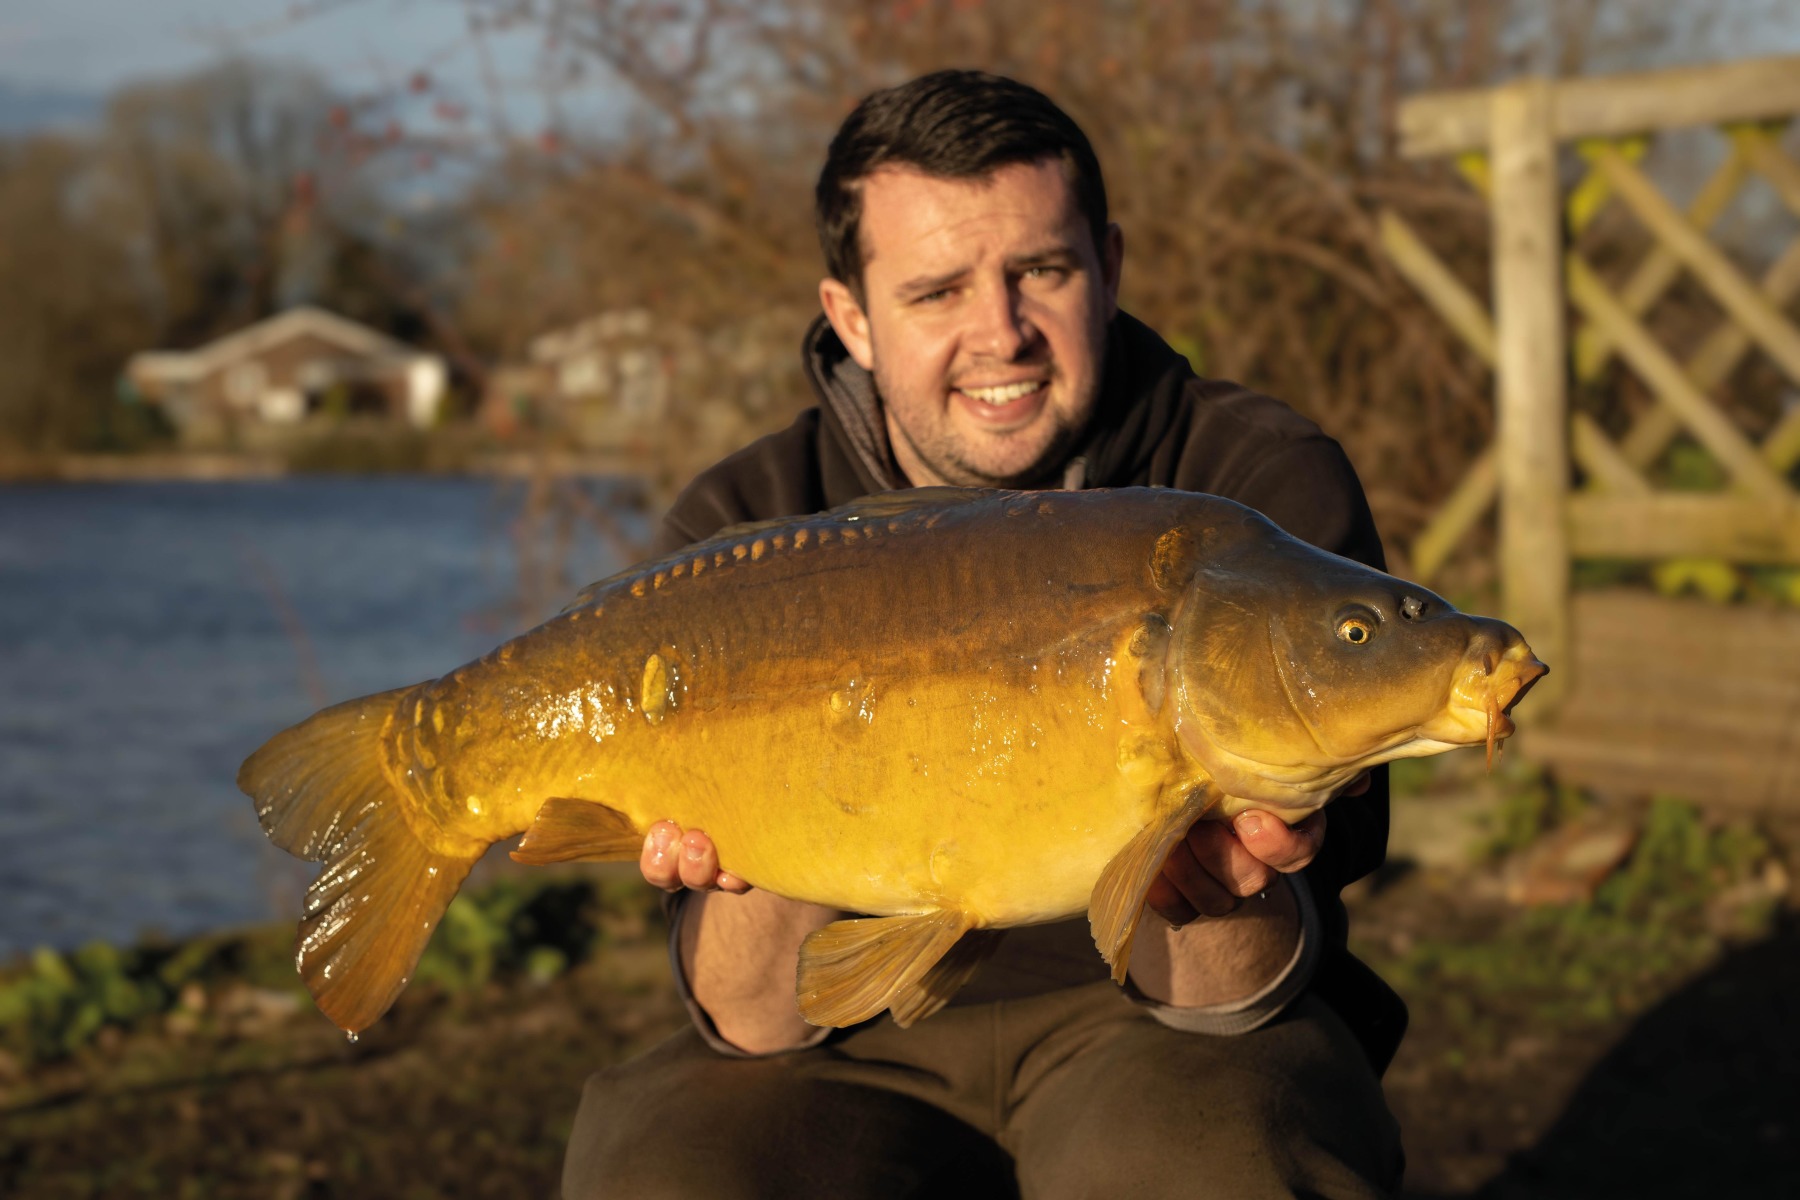 A mid-double mirror 20. The red ‘tip-off’ certainly paid off!